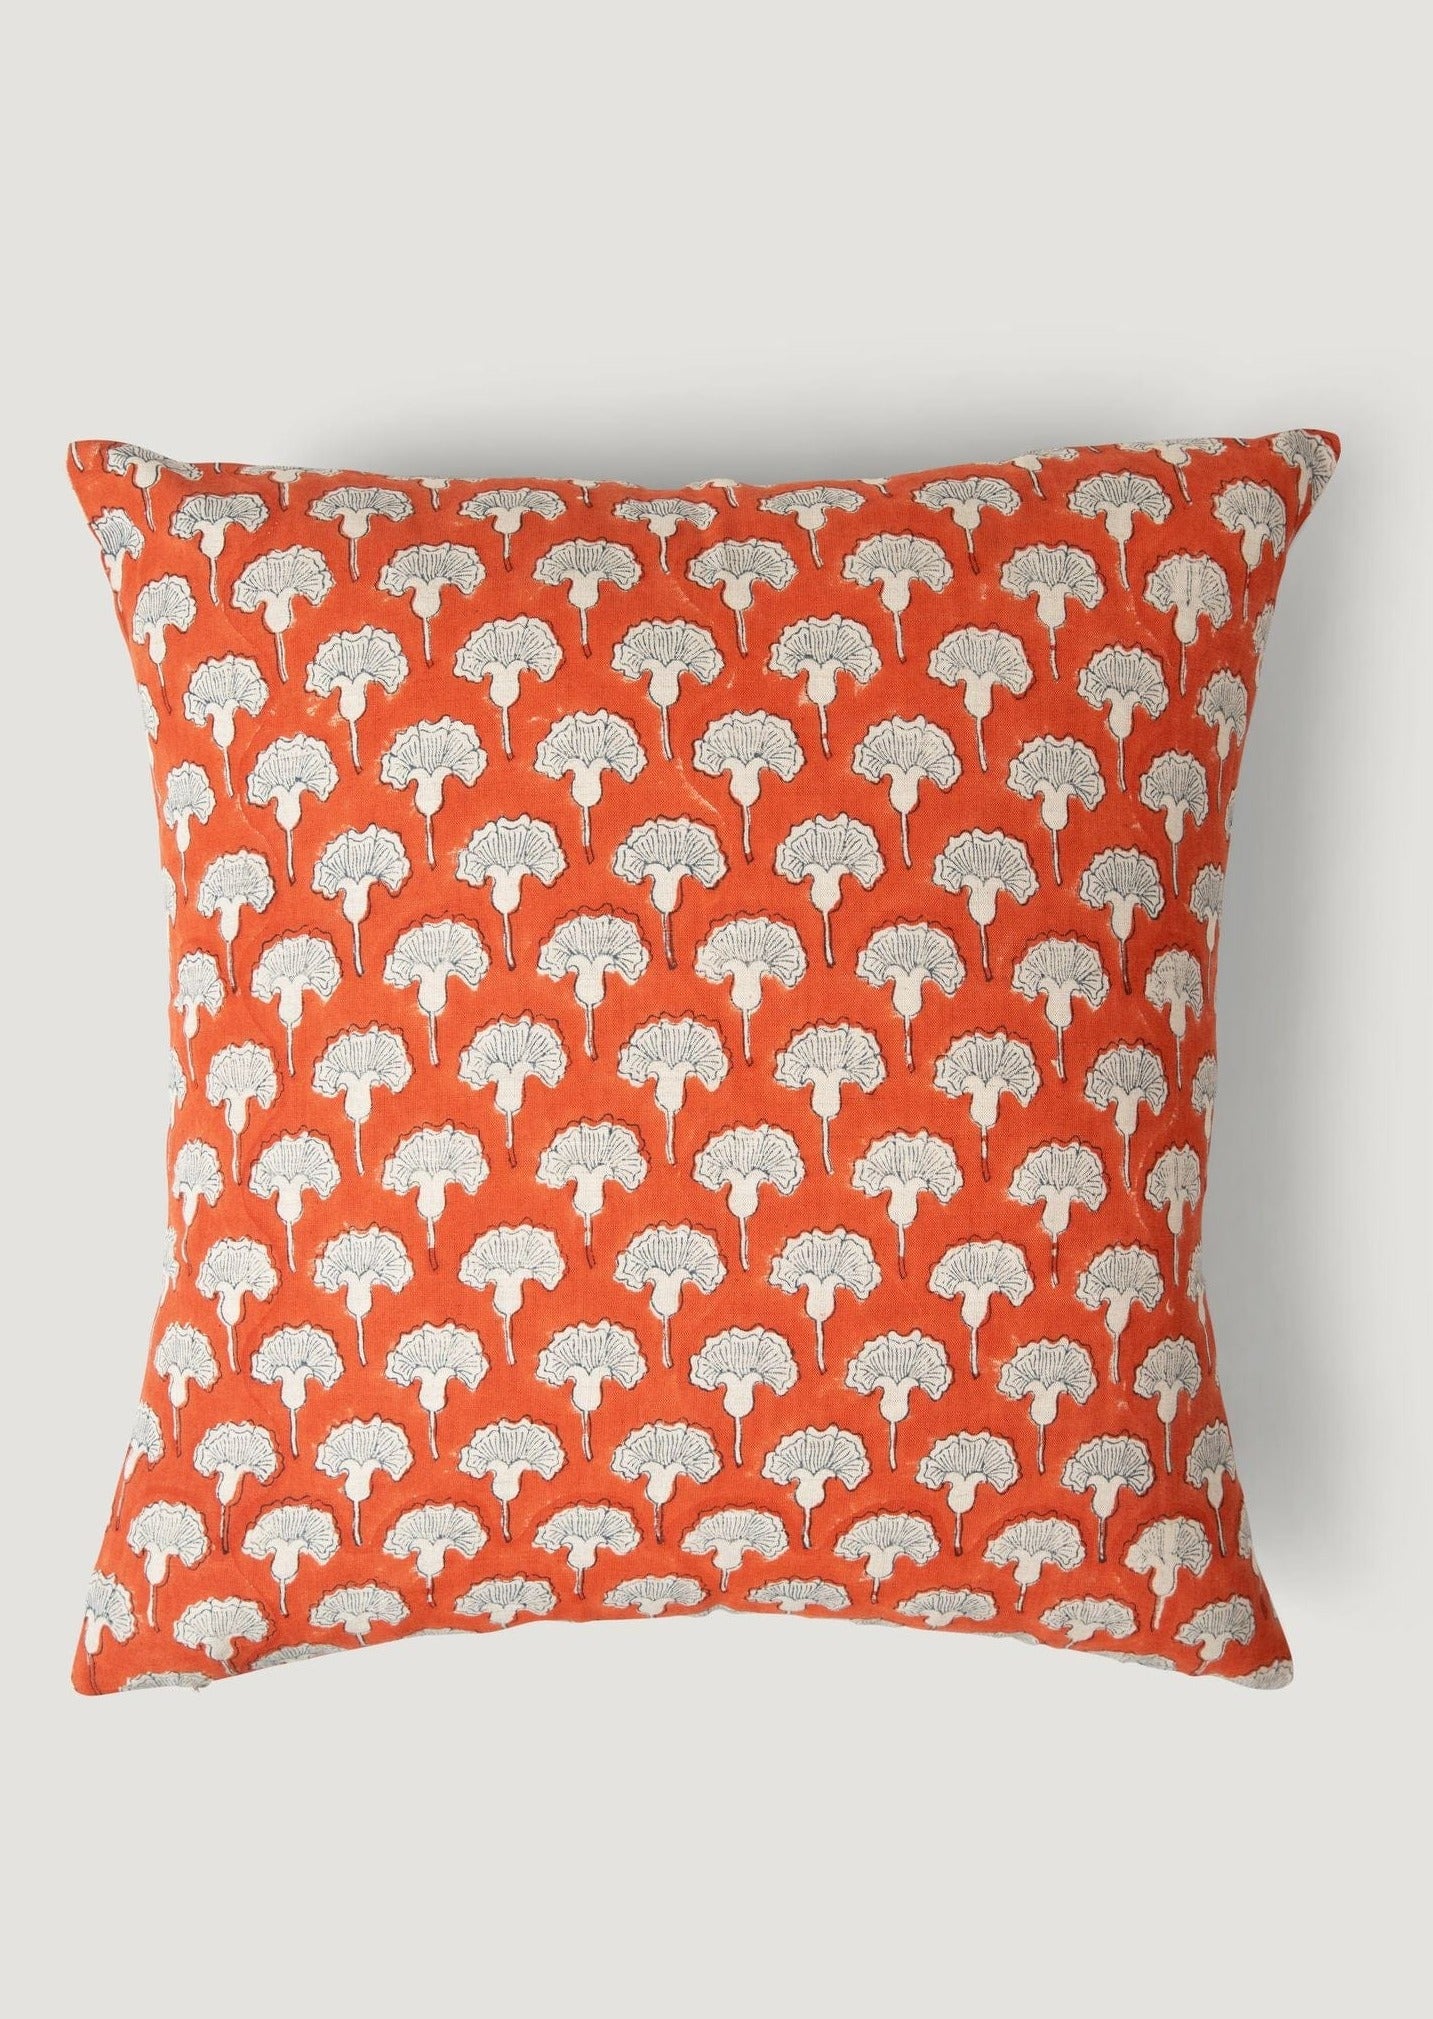 Hand-Printed Linen Pillow Cover in Orange Floral Pattern